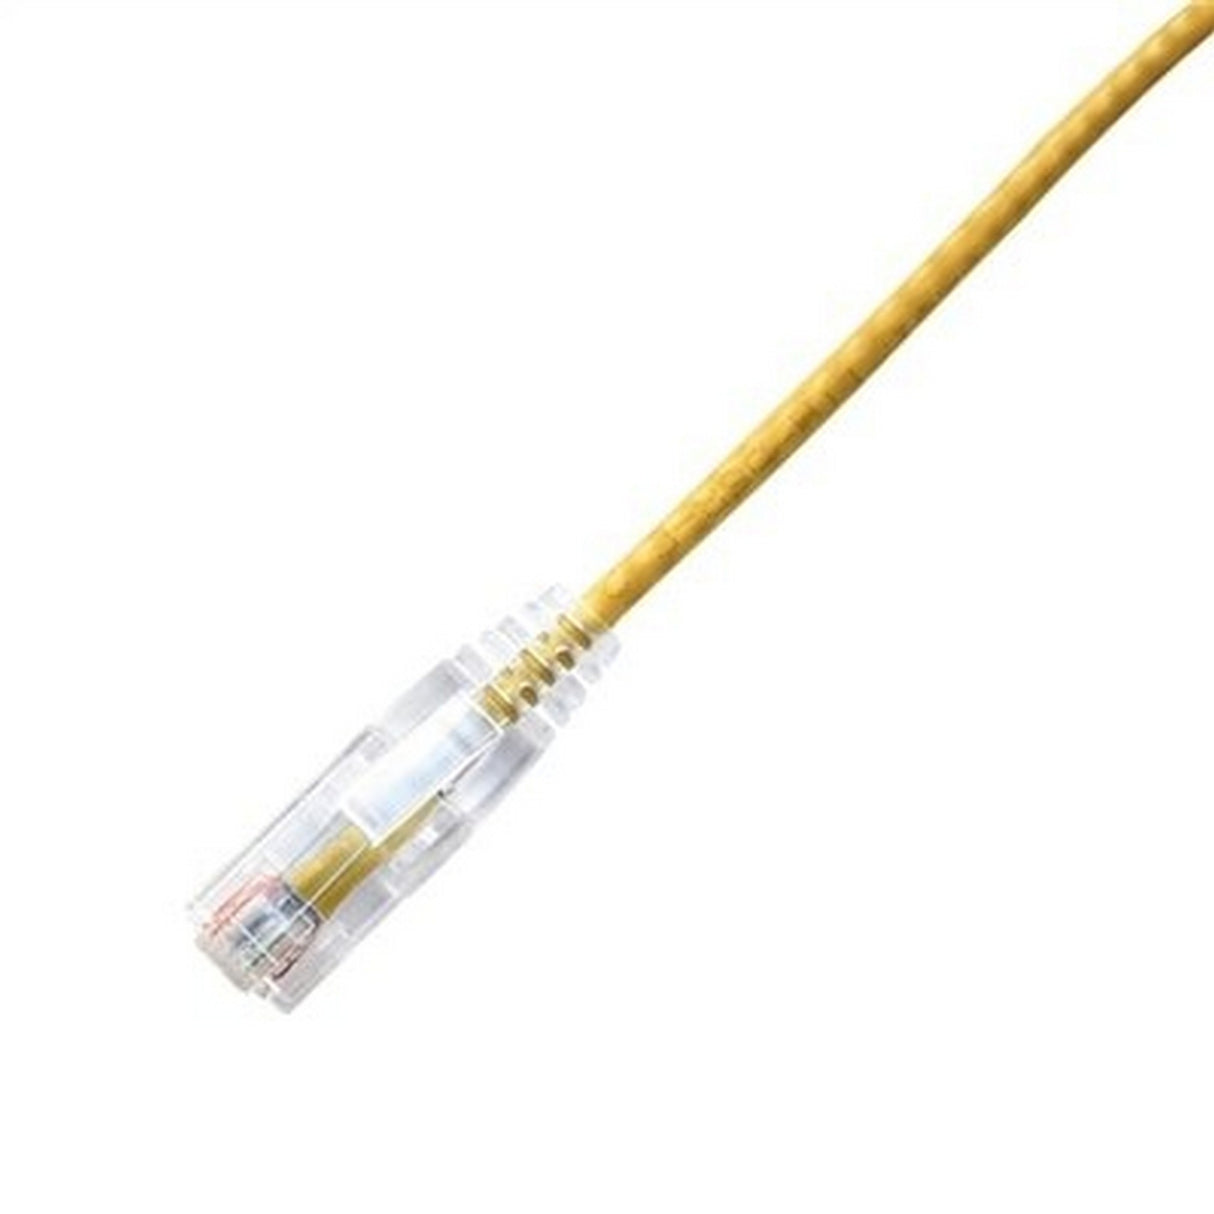 LYNN CPCS-AYE-014F CHOICE Slim 28AWG CAT6A Ethernet Patch Cable, 14-Foot, Yellow